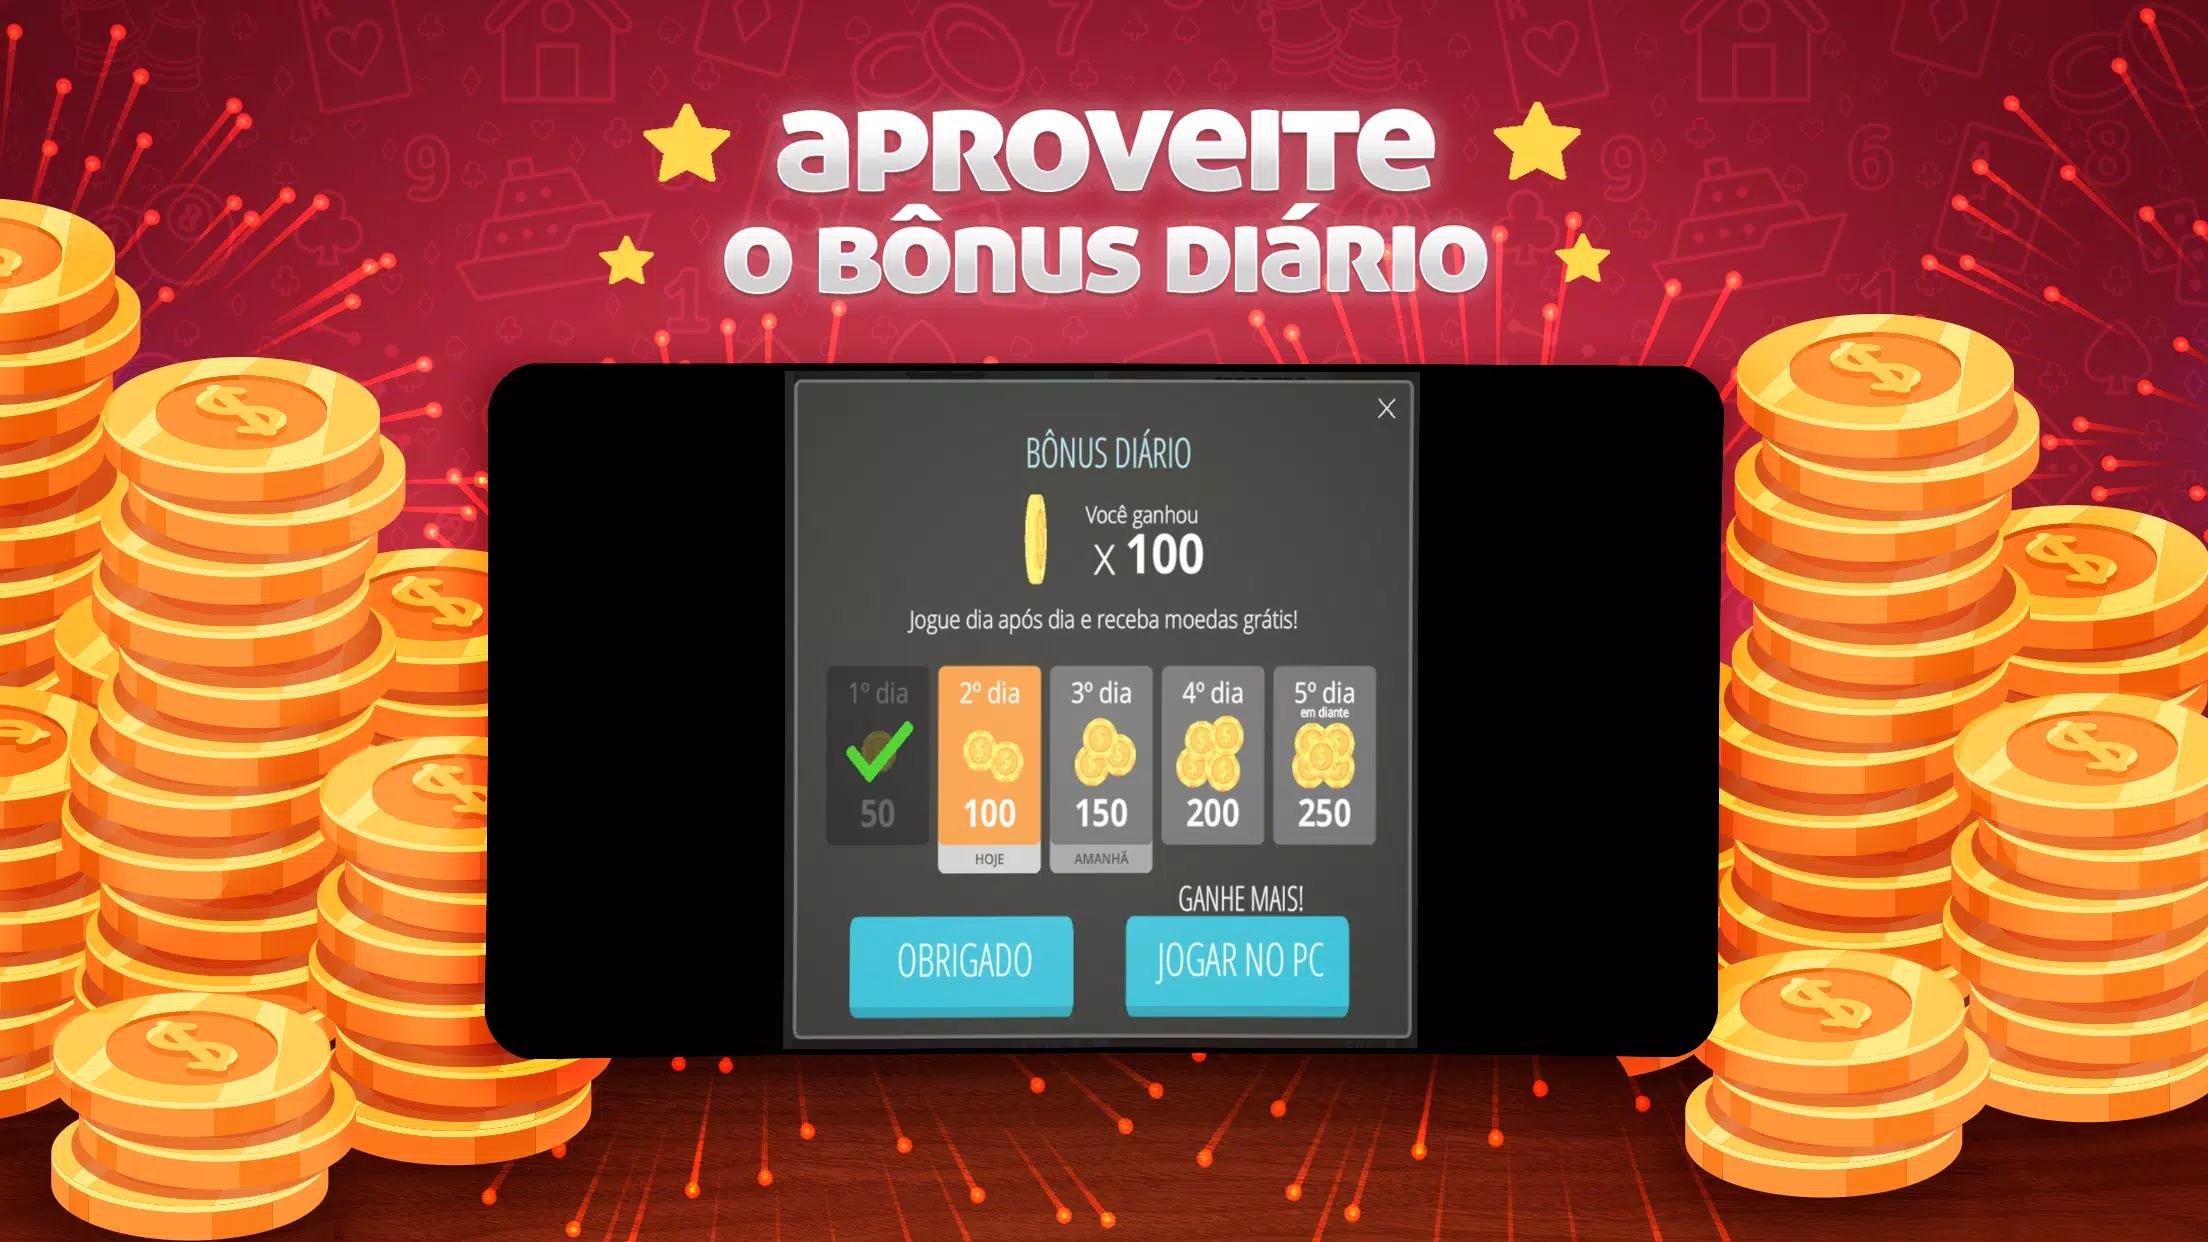 Brazilian Damas - Online APK 11.12.1 for Android – Download Brazilian Damas  - Online APK Latest Version from